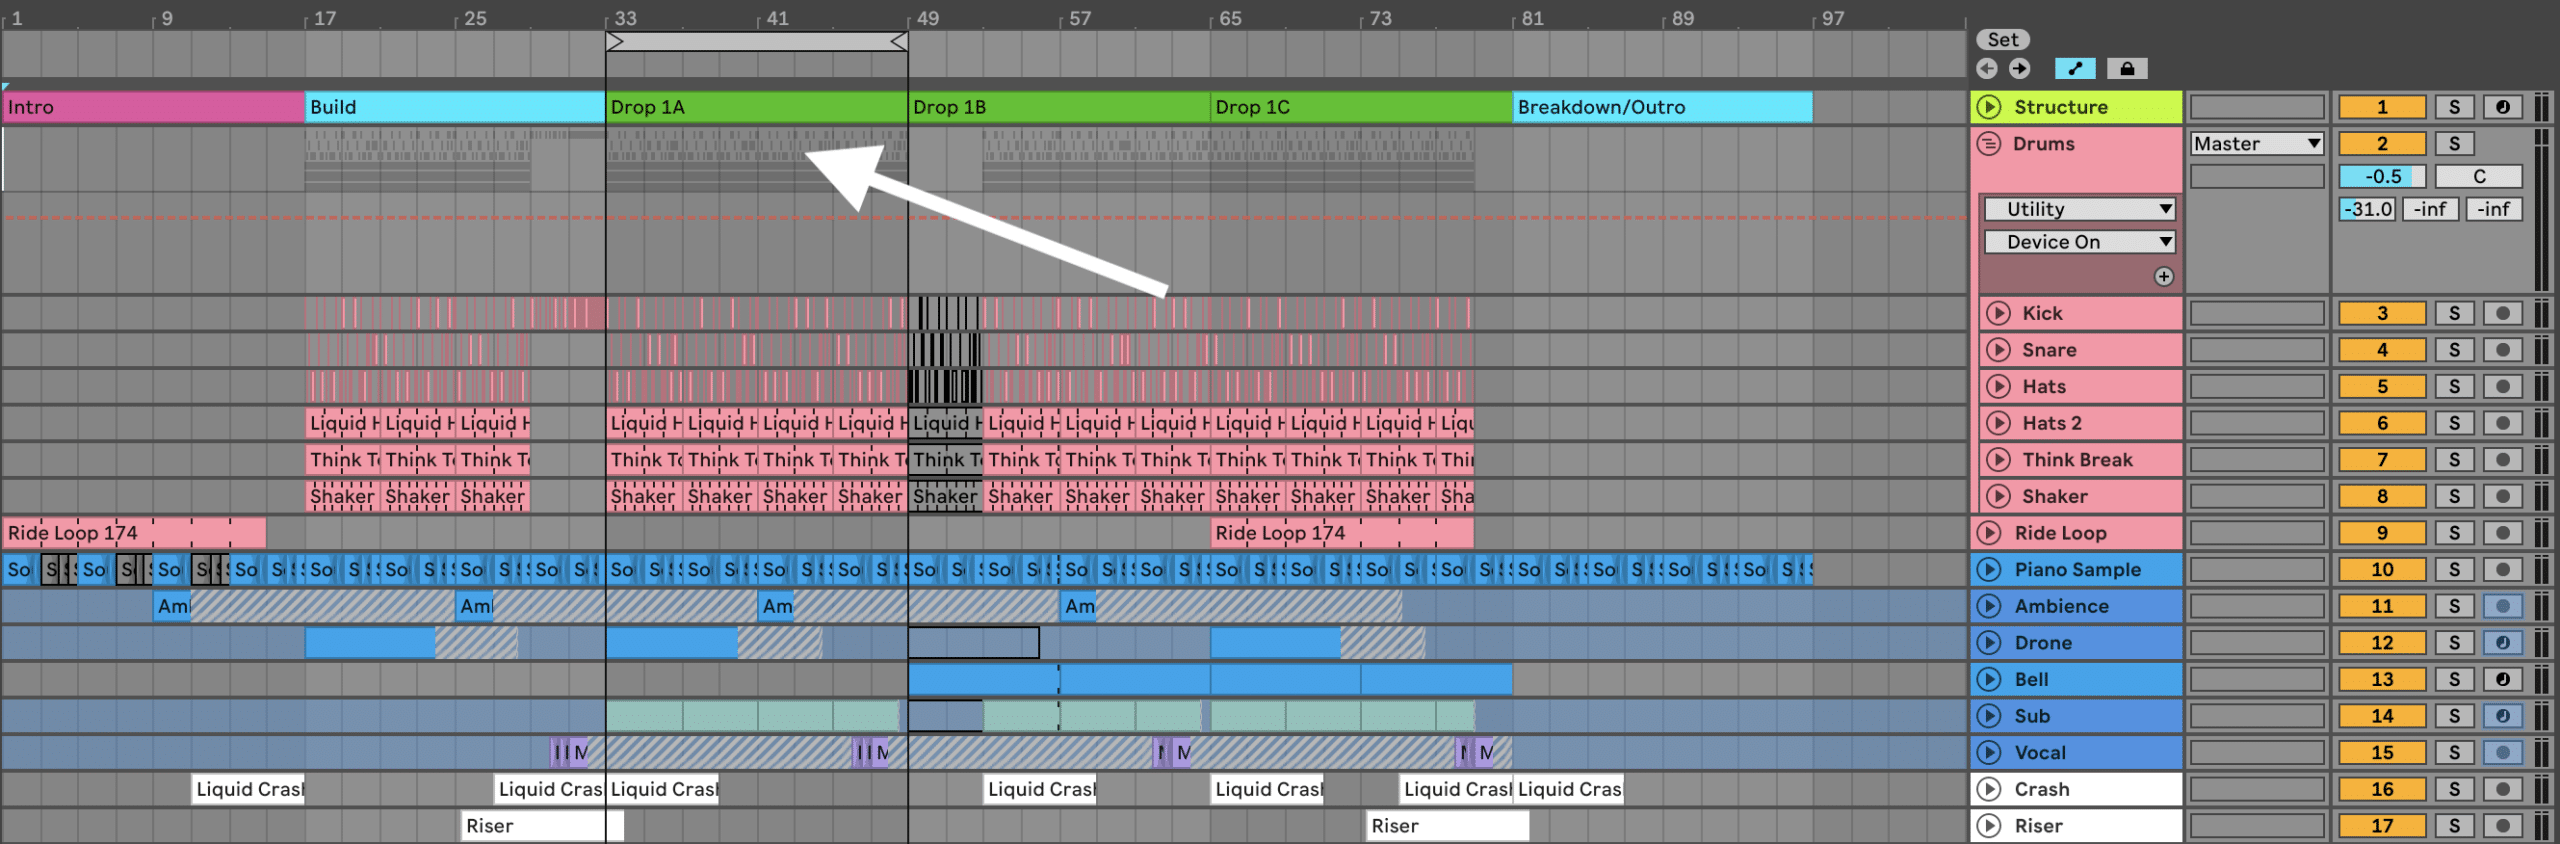 Liquid DNB track structure in Ableton Live 11